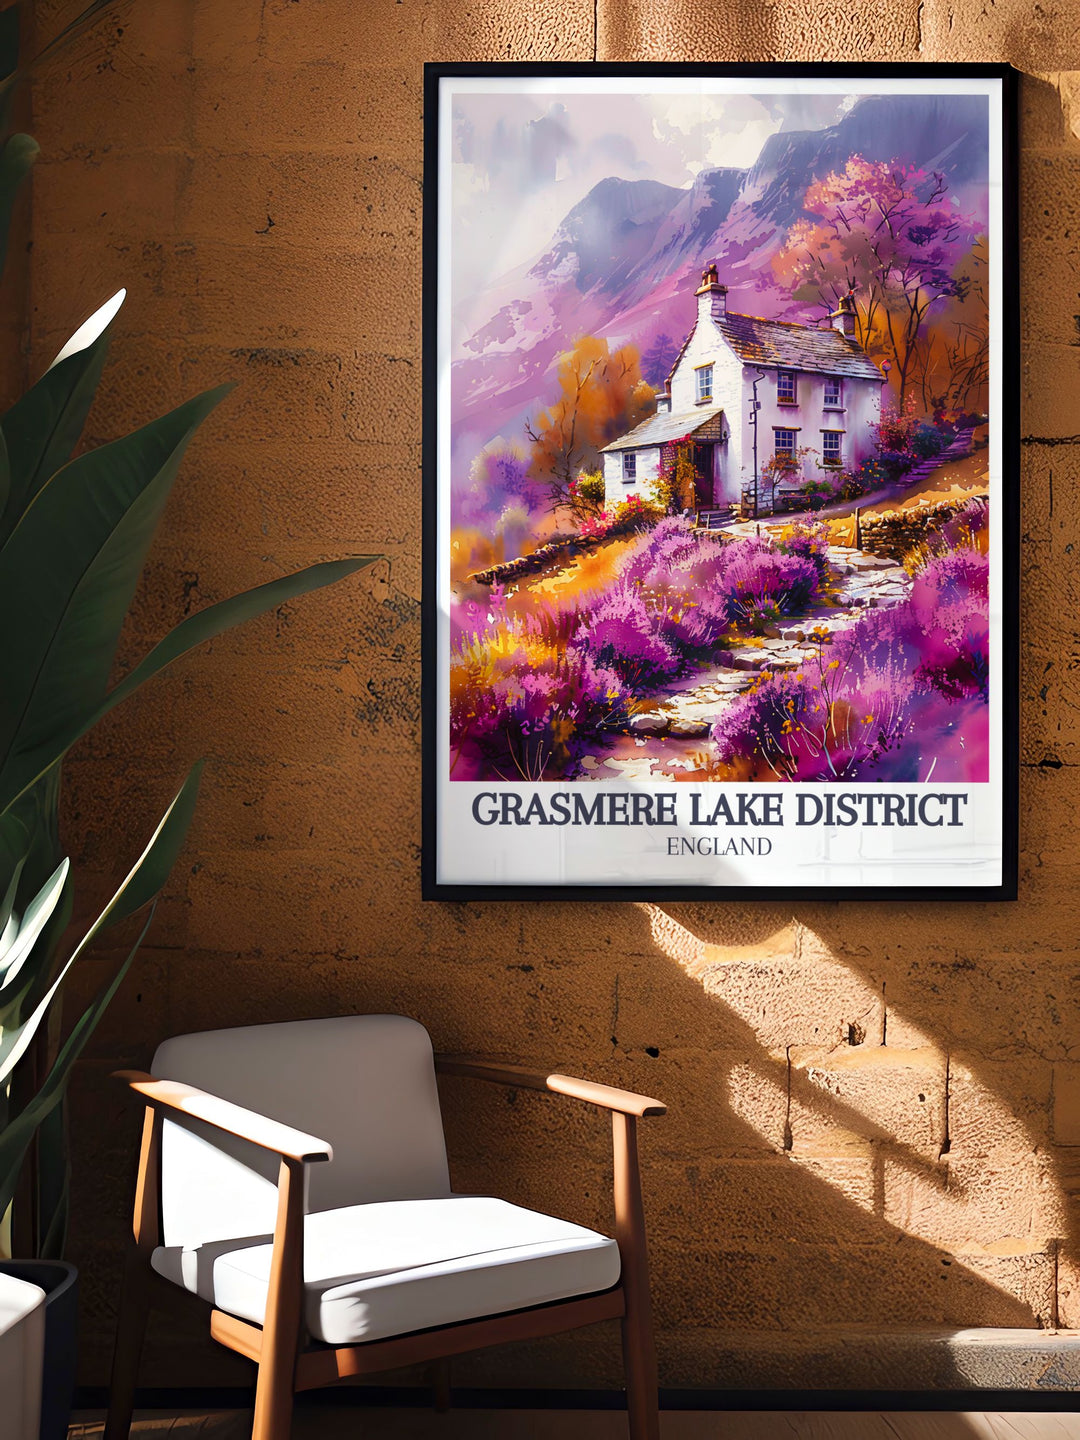 Showcasing the picturesque scenery of Grasmere Lake and the quaint village, this poster celebrates the natural and historical significance of the Lake District, England, ideal for nature and history lovers alike.